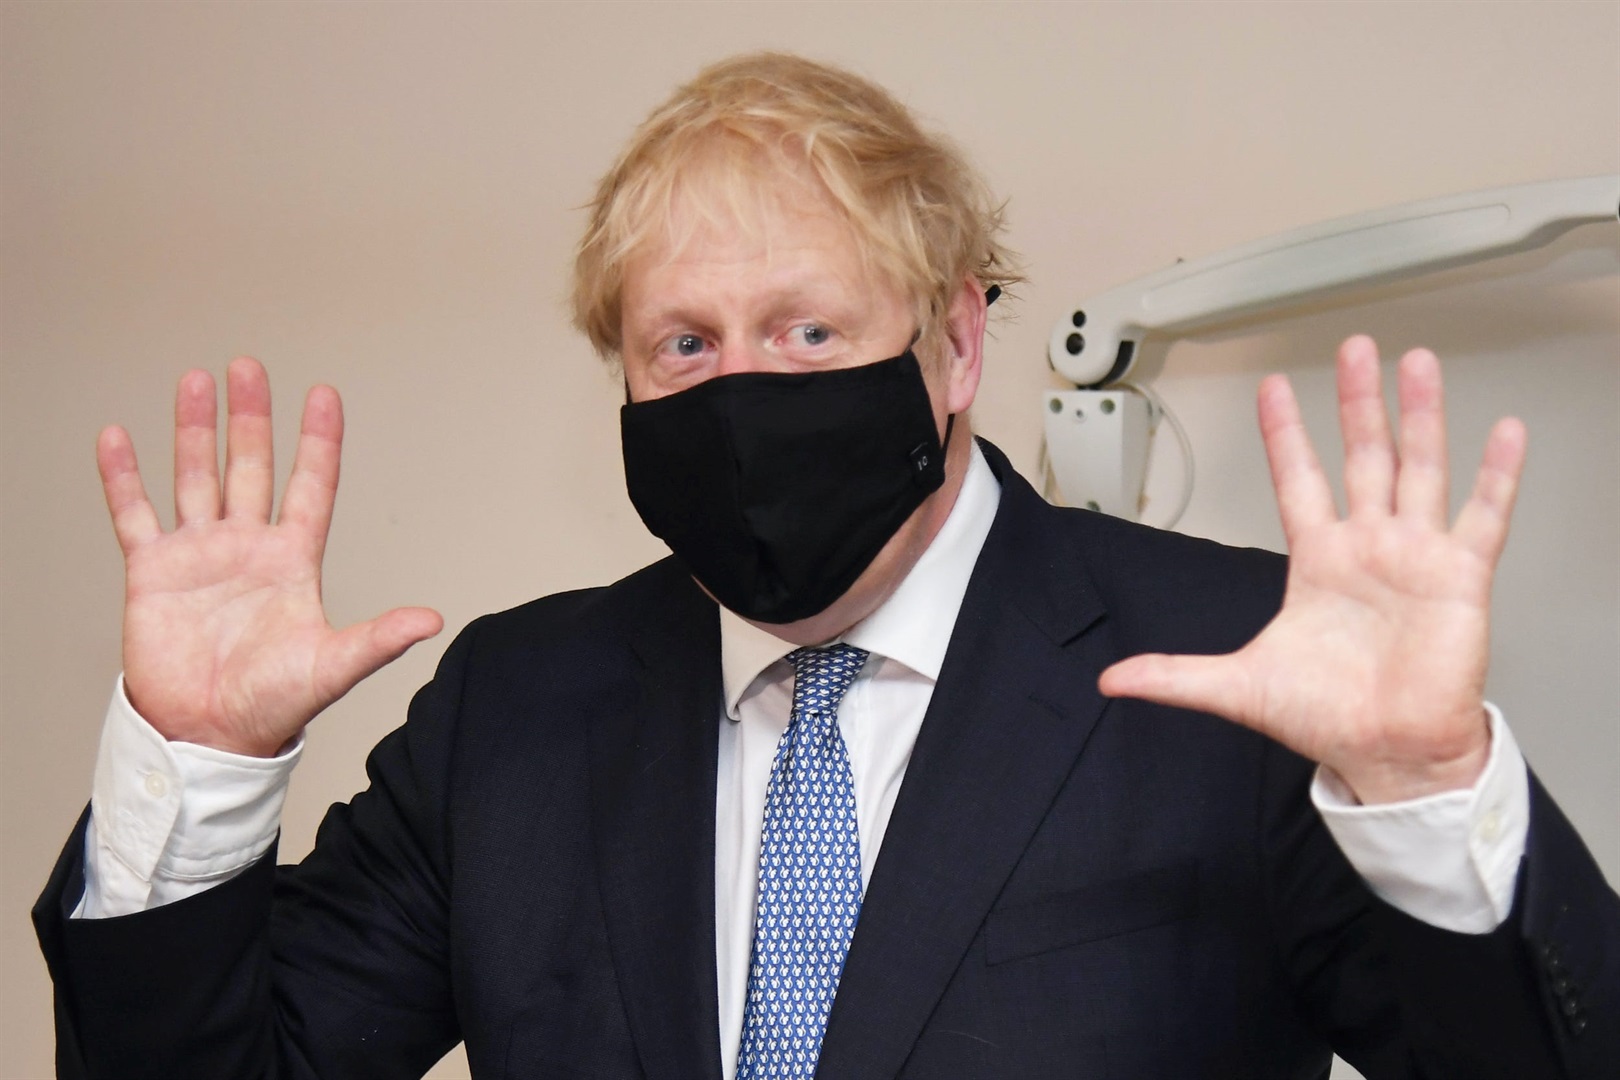 britain-on-course-to-lift-covid-19-restrictions-on-19-july-johnson-says-news24